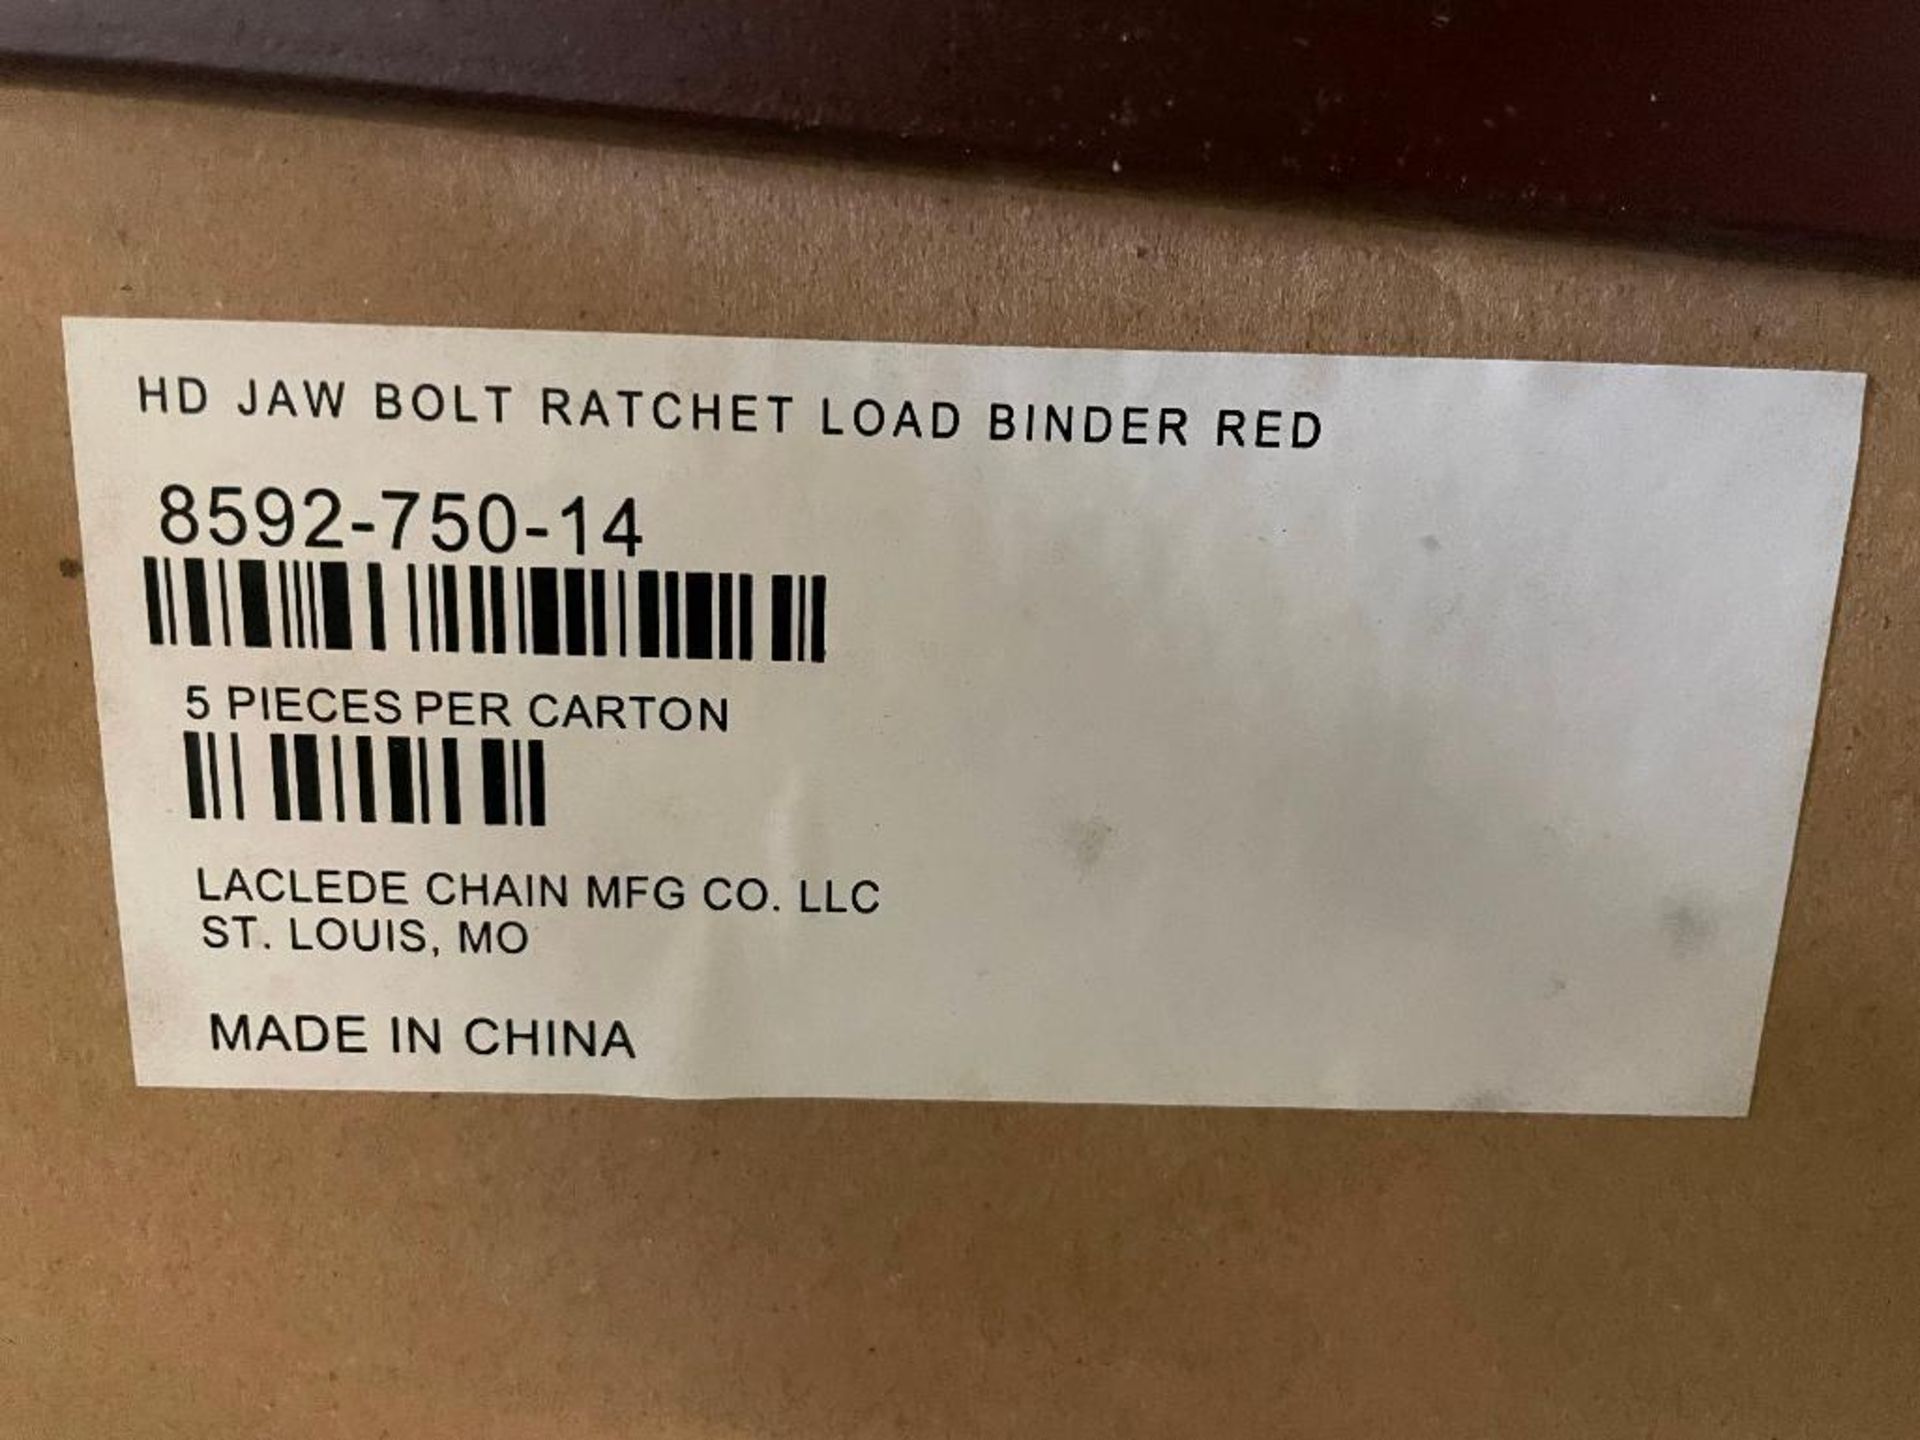 DESCRIPTION: (2) CASES OF HD JAW BOLT RATCHET LOAD BINDERS - RED. 5 PER CASE, 10 IN LOT TOTAL. BRAND - Image 5 of 6